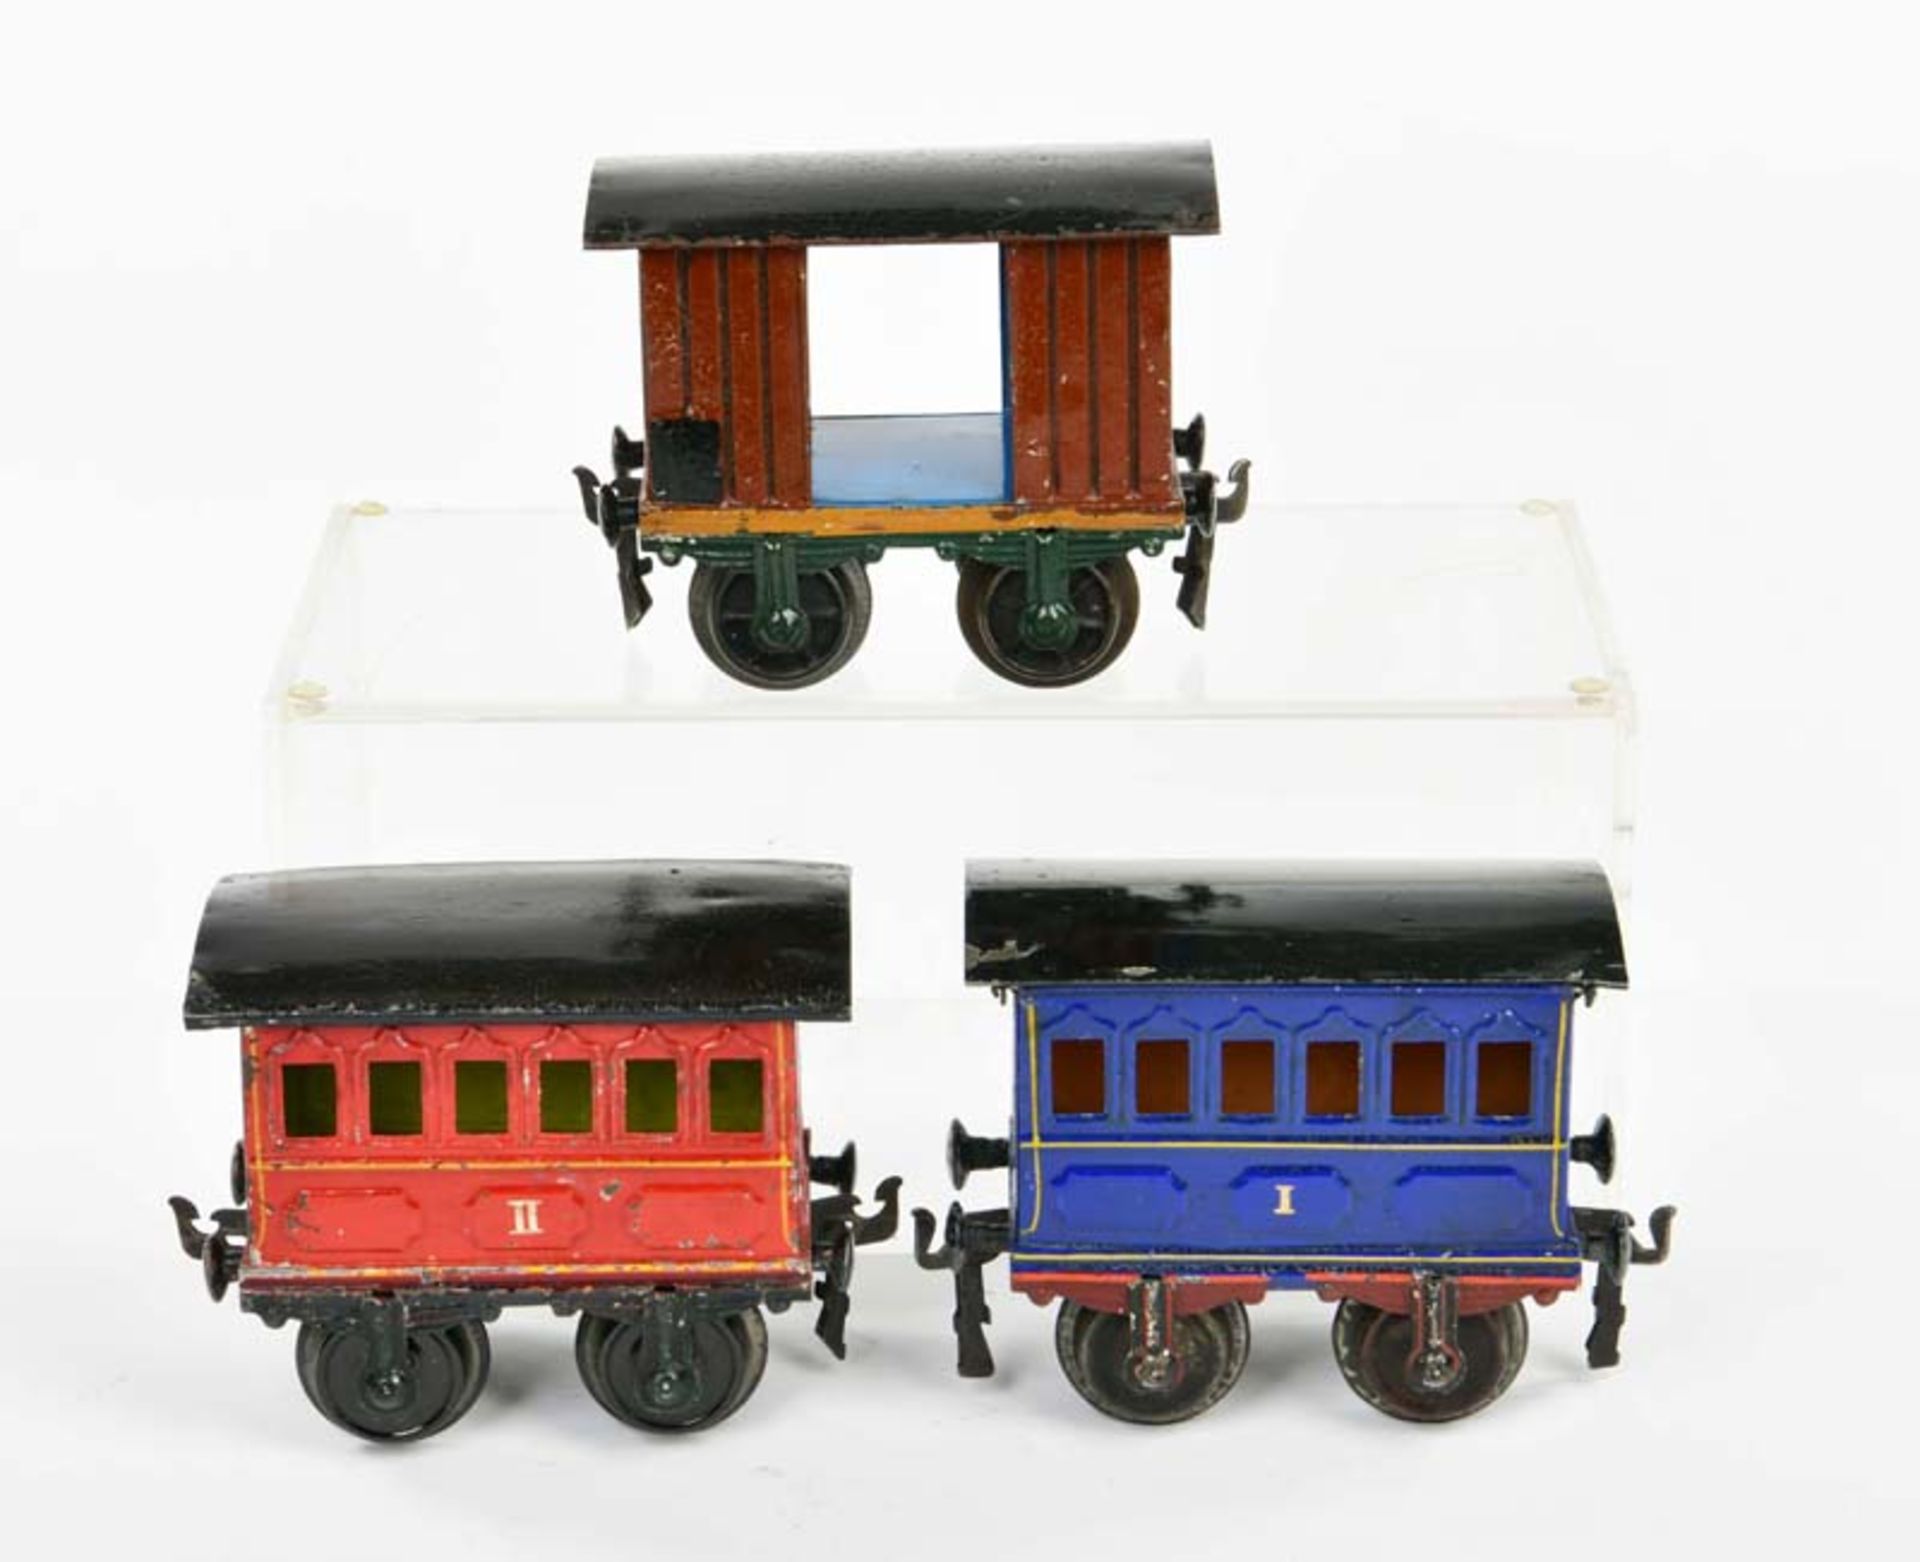 Märklin, 3 wagons gauge 1, Germany pw, 2 wagons refinished, otherwise good condition